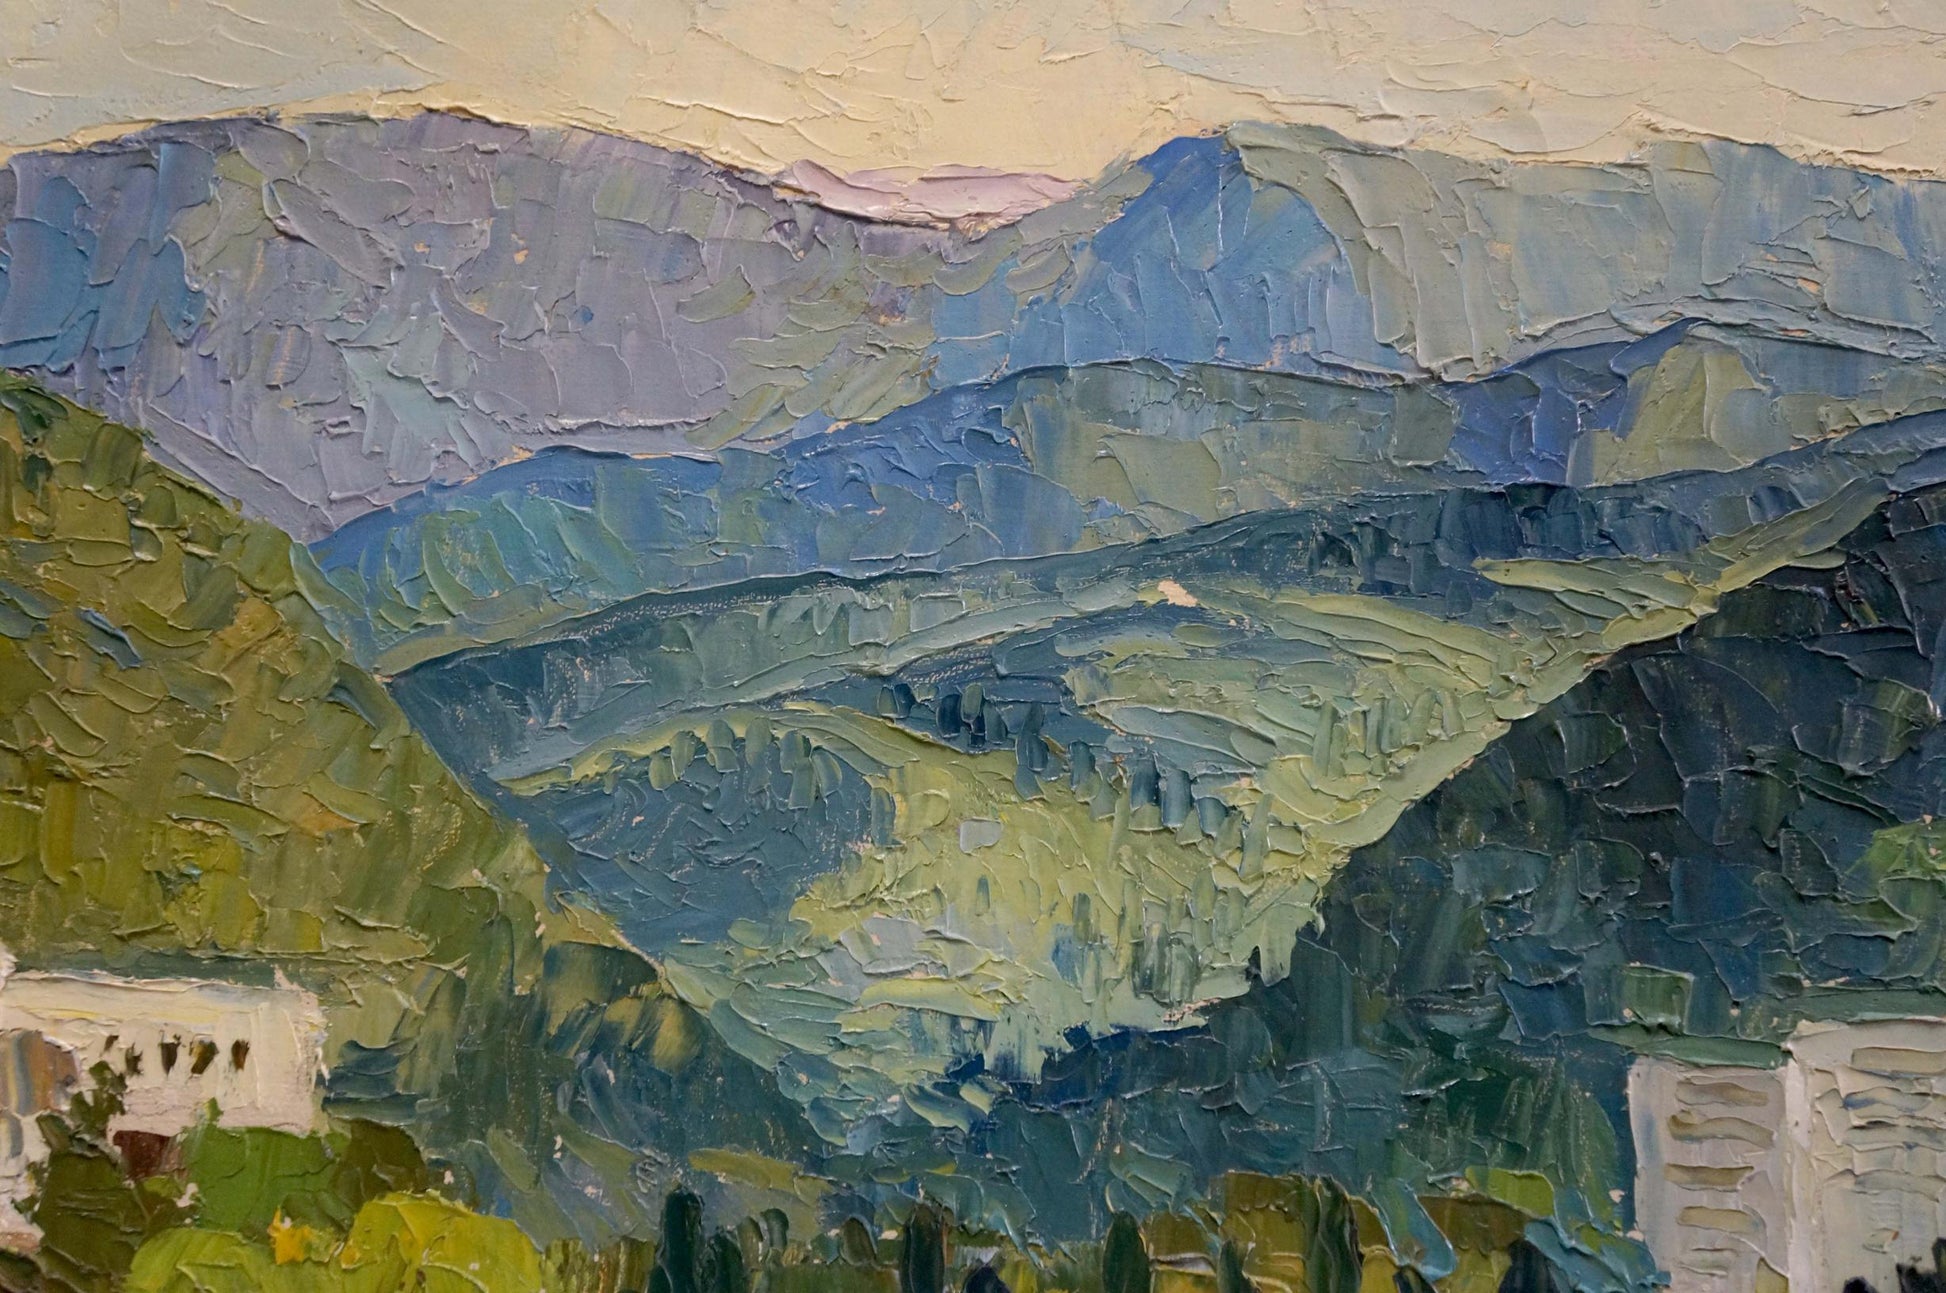 An anonymous artist captured the grandeur of the Great Mountains in oil